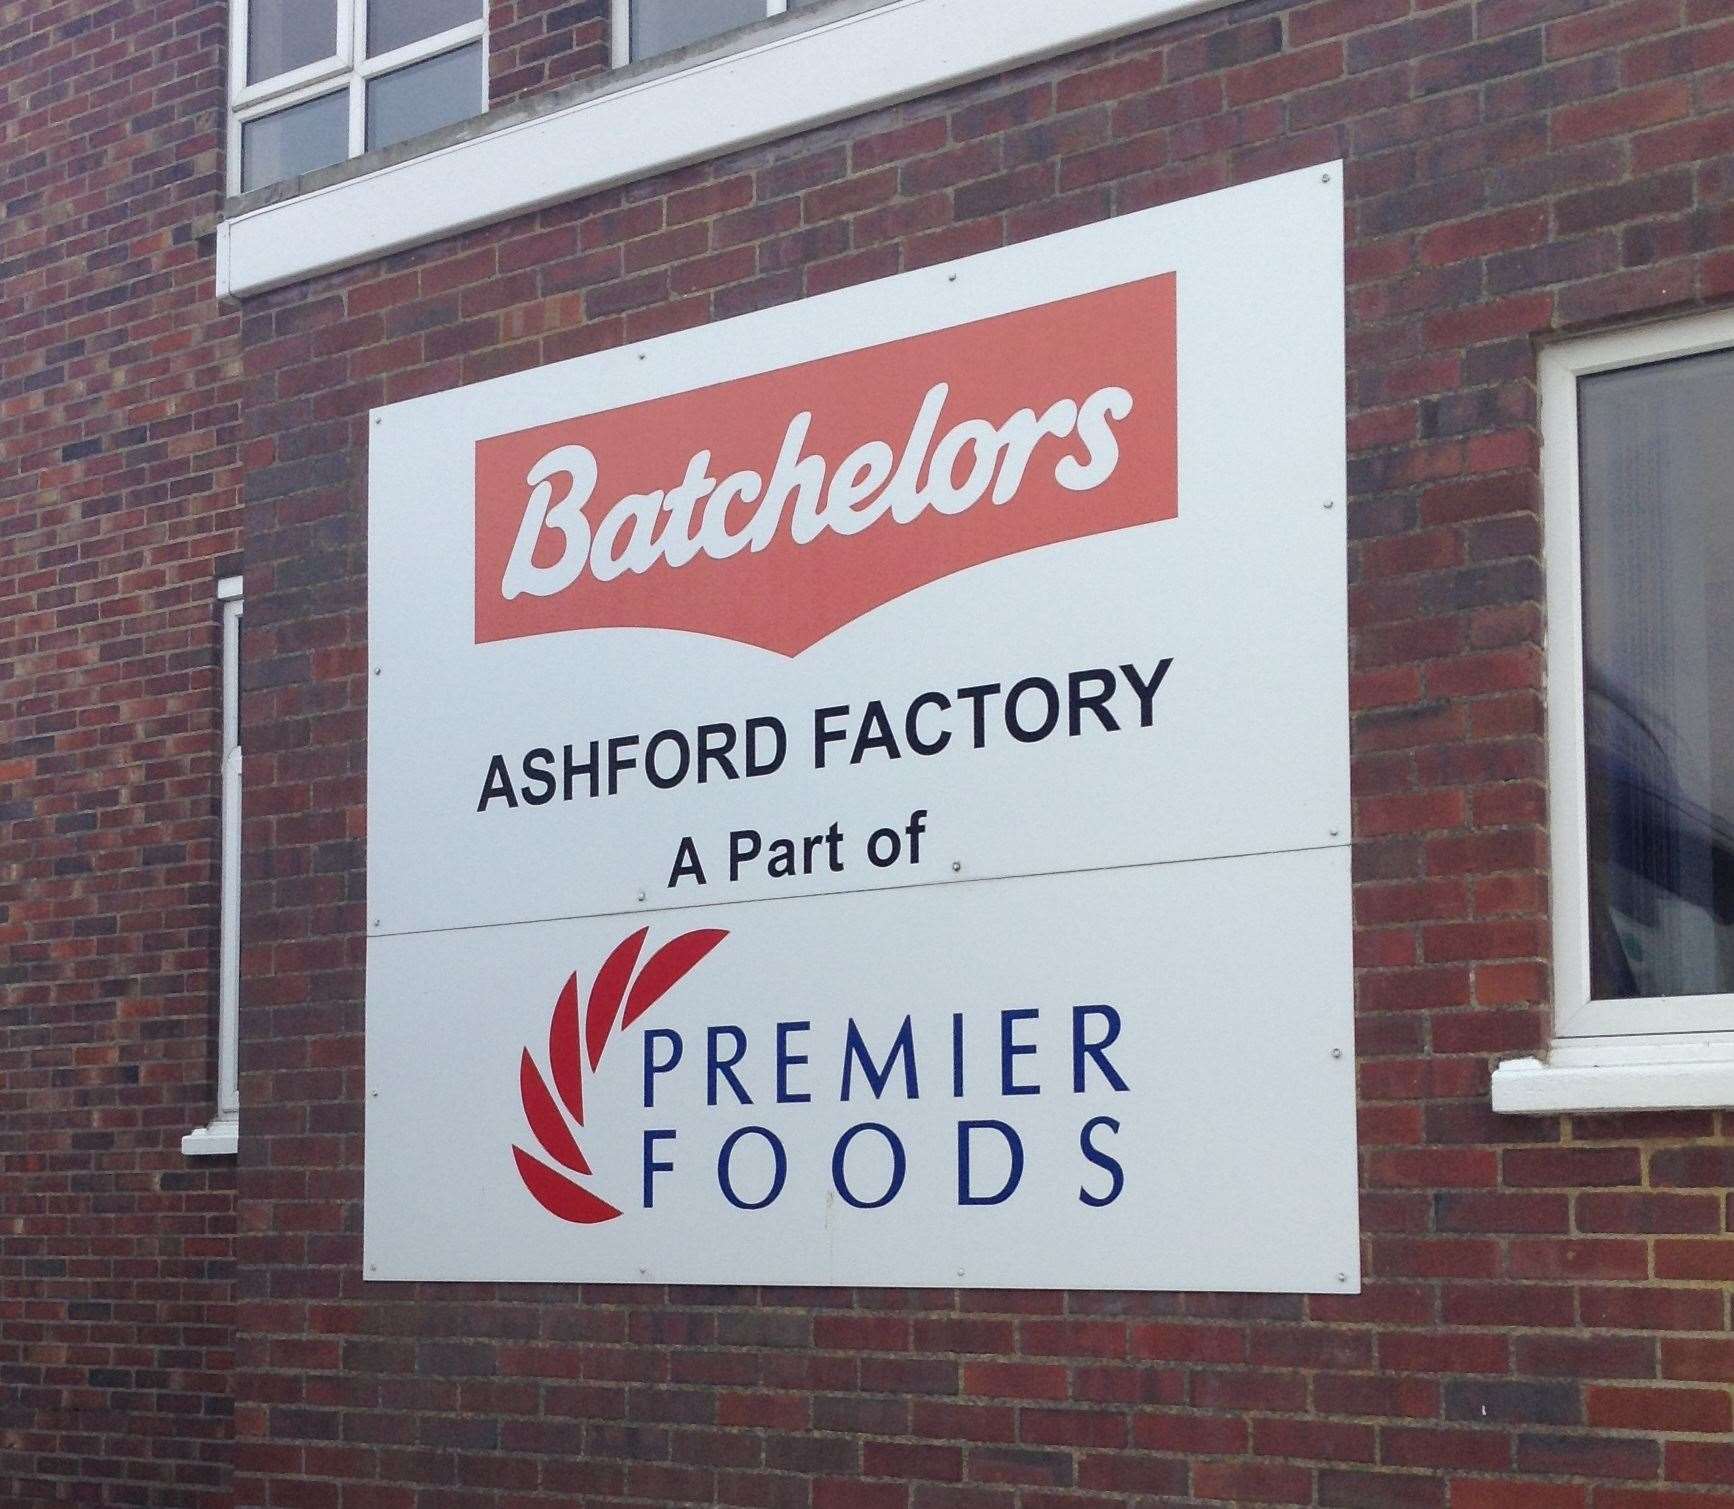 Mr Smythson worked at the Premier Foods factory in Ashford